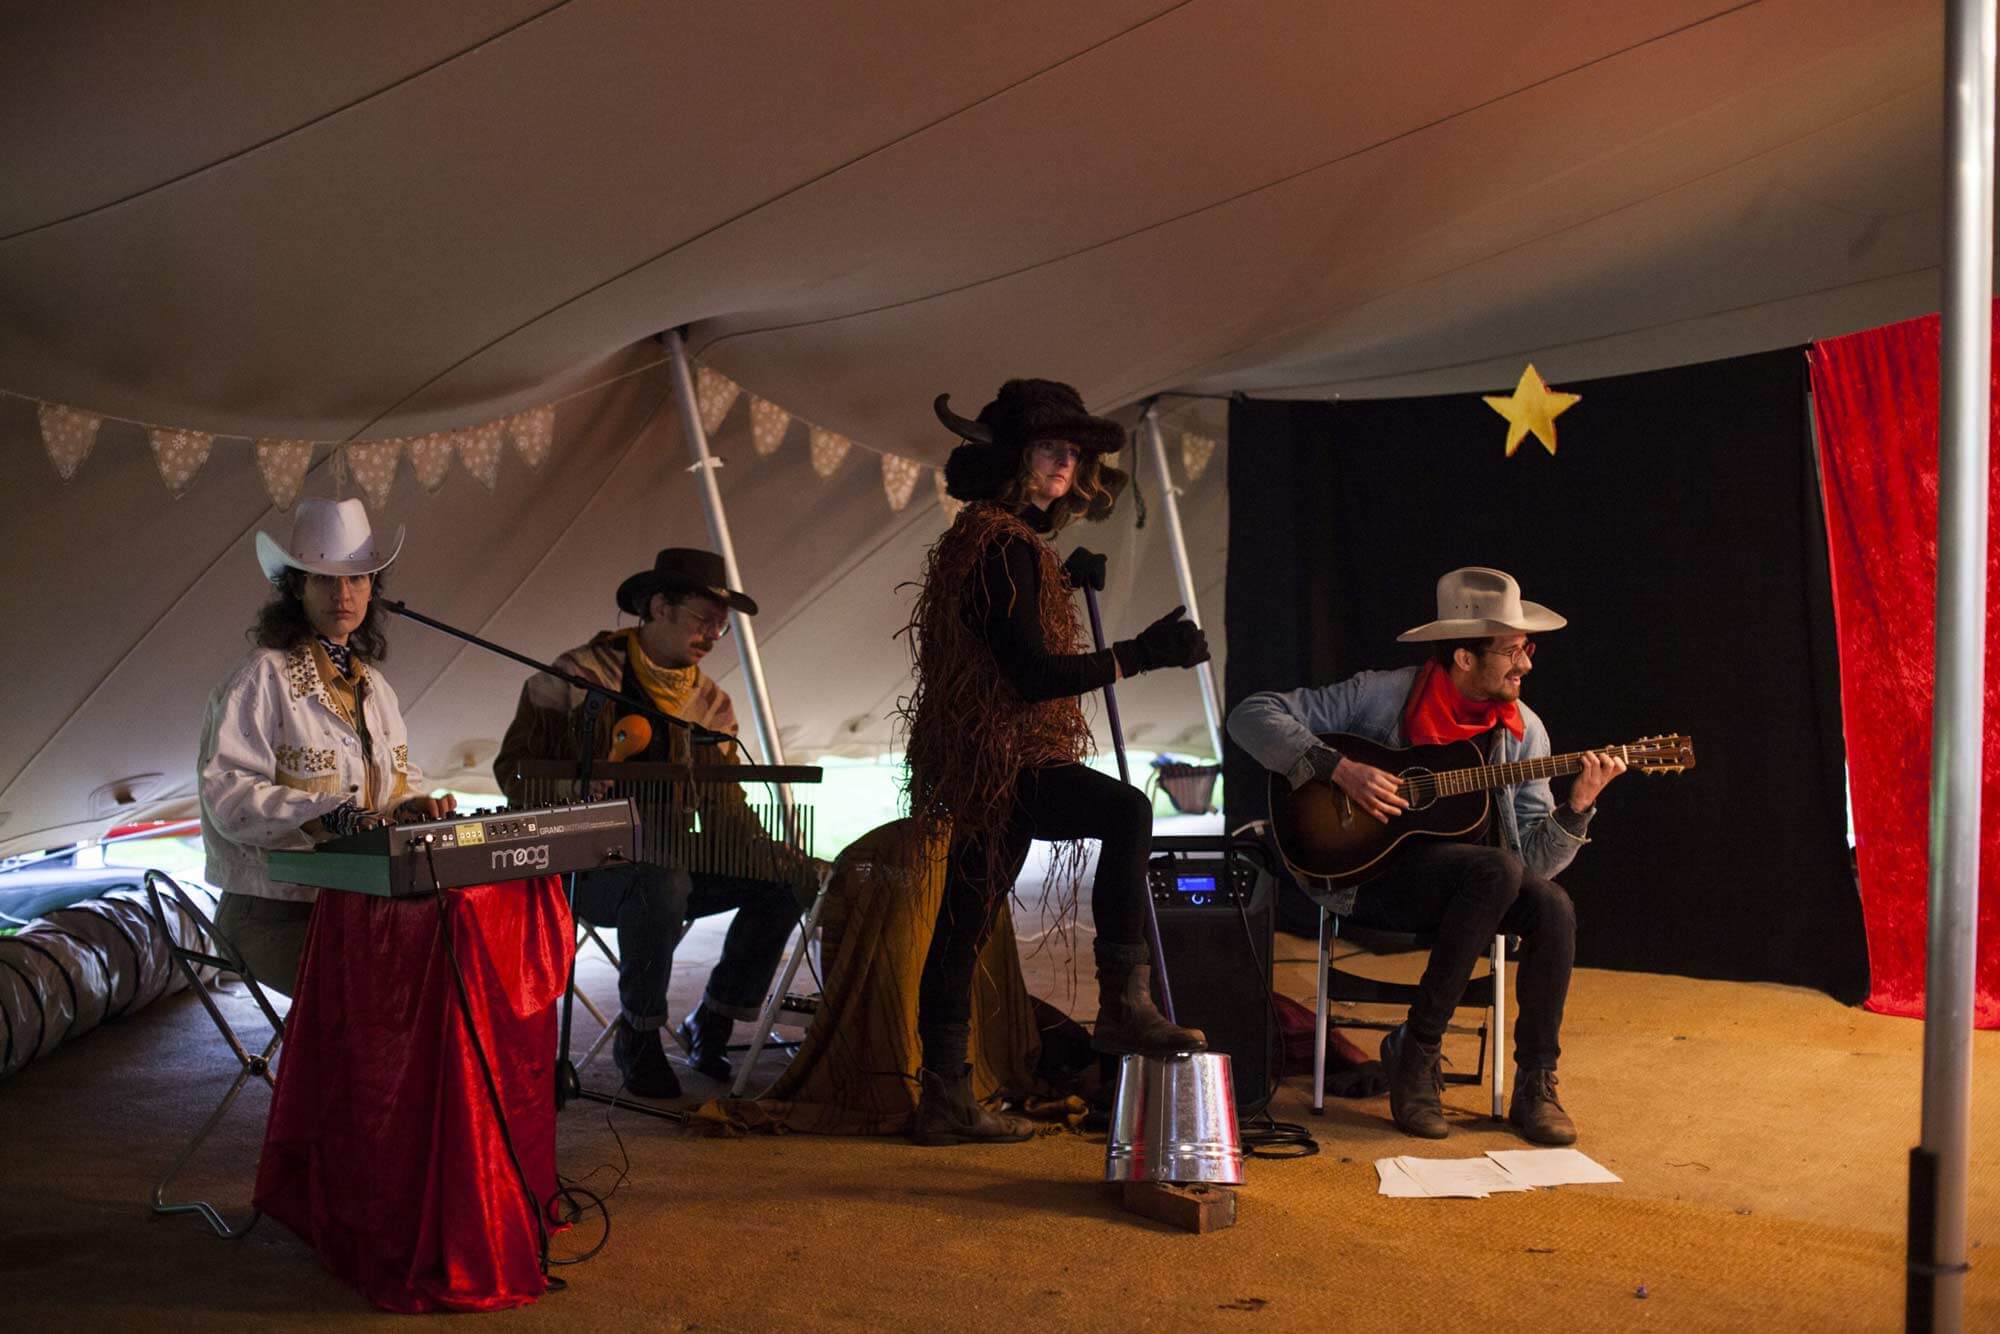 Interior photograph of four musicians in a tent, three dressed as cowboys and one as a buffalo